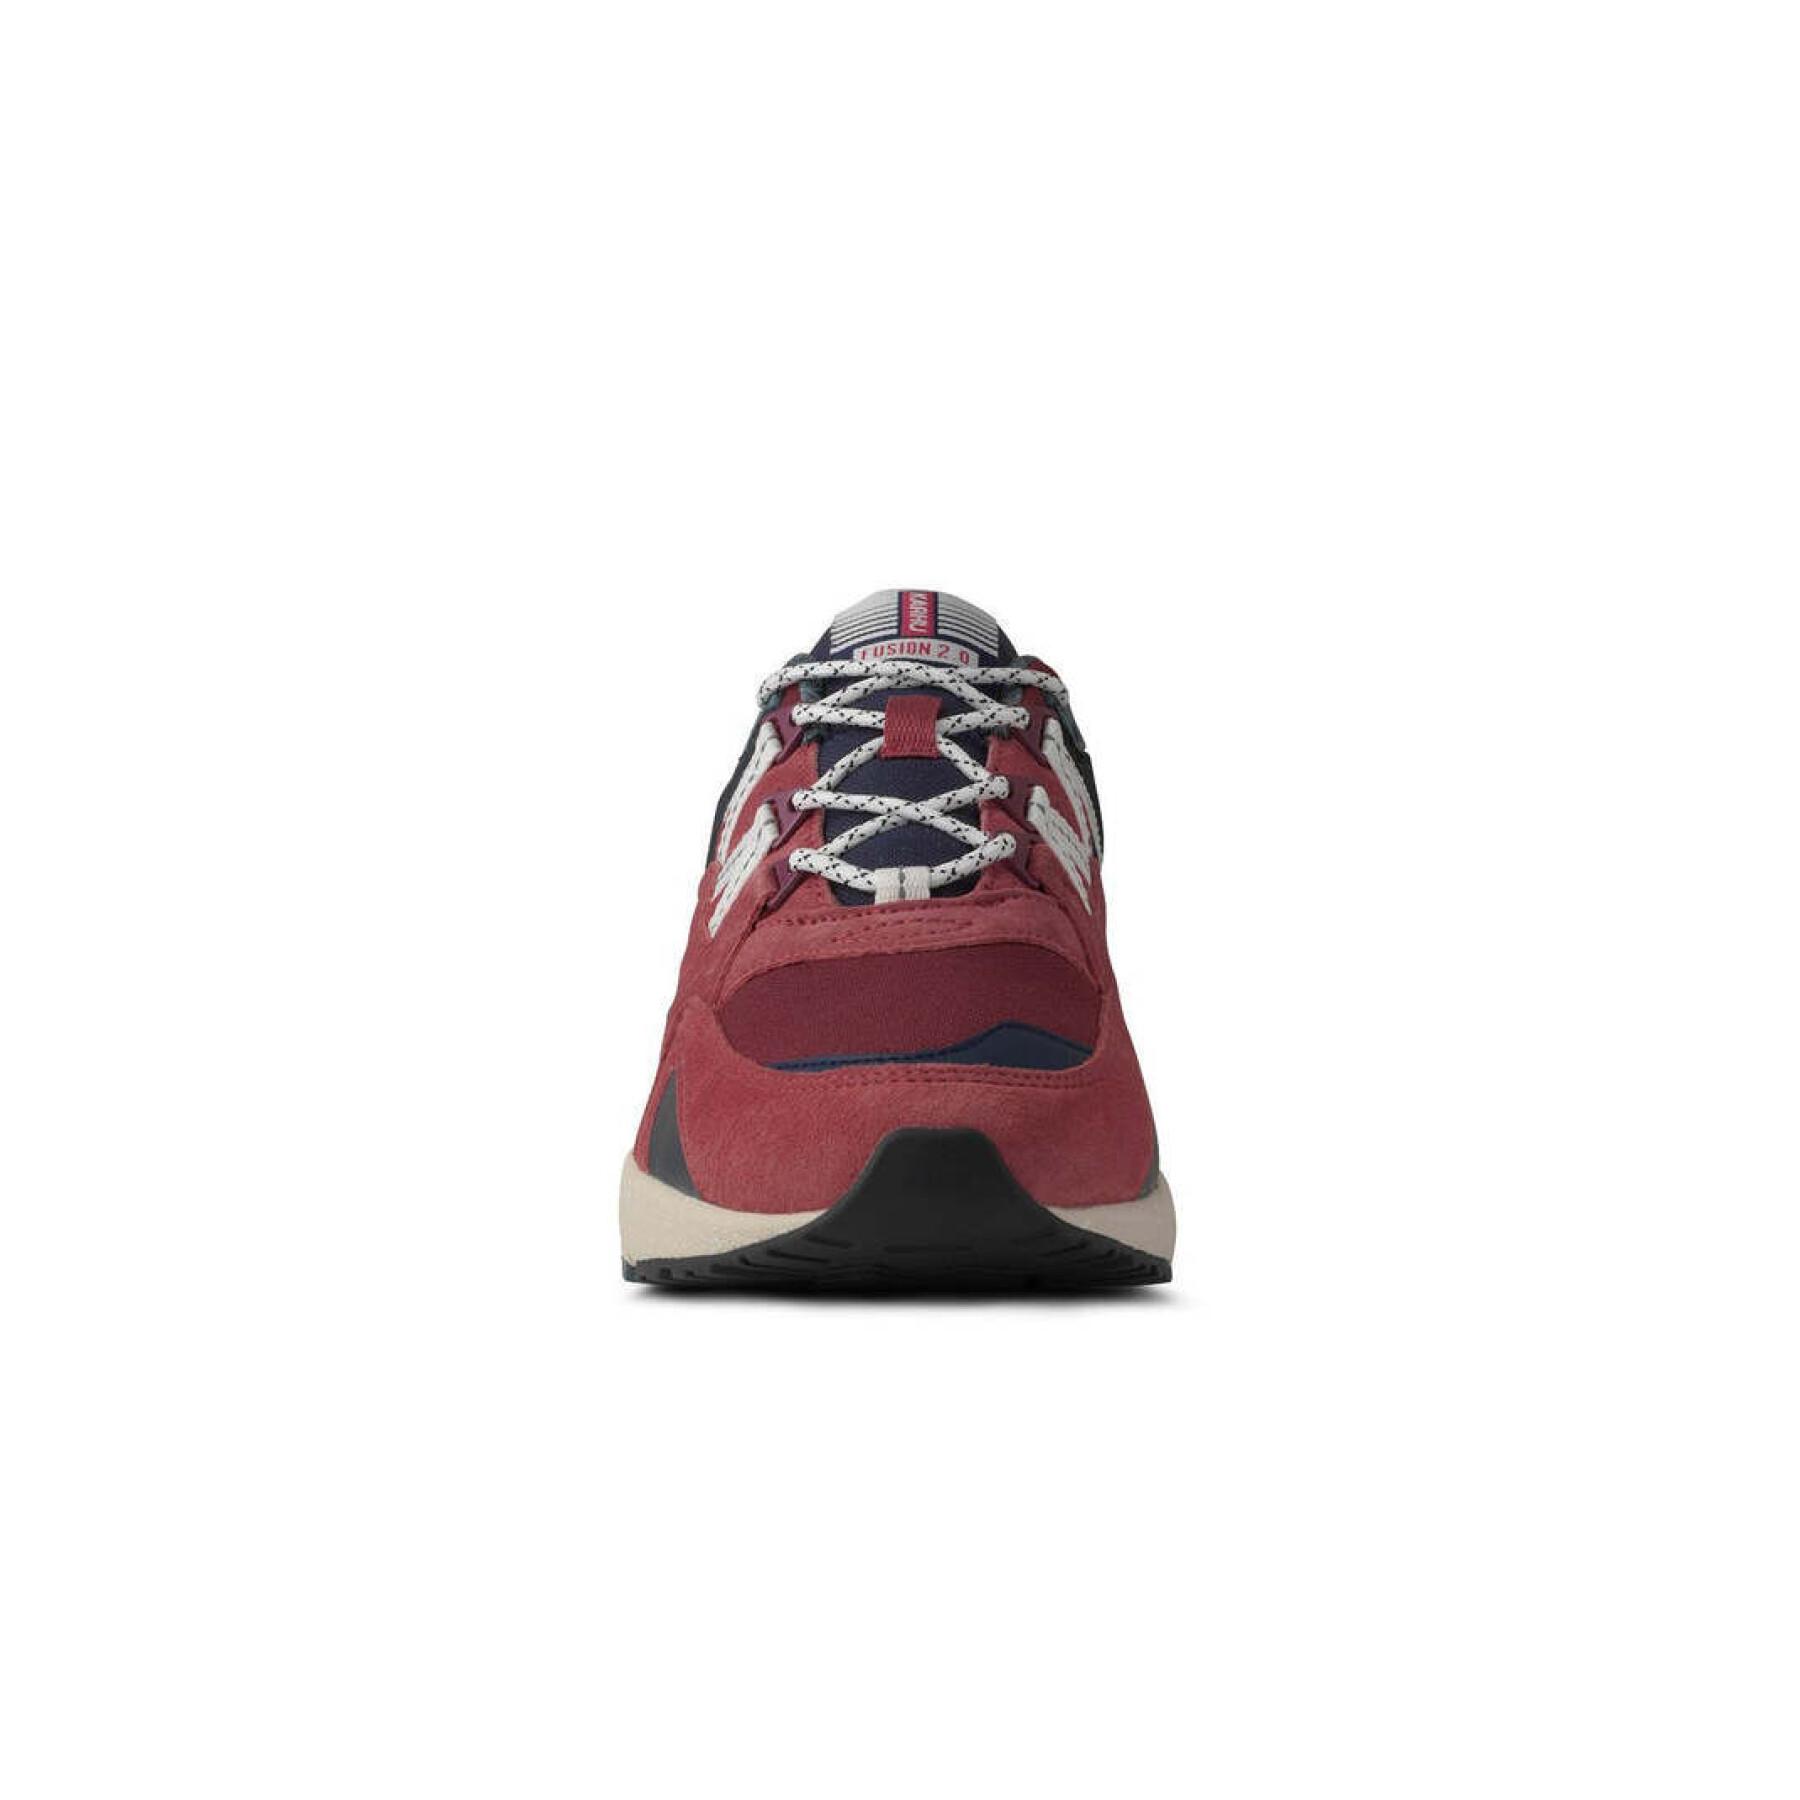 Sneakers Karhu Fusion 2.0 - F804157 mineral red/ lily white